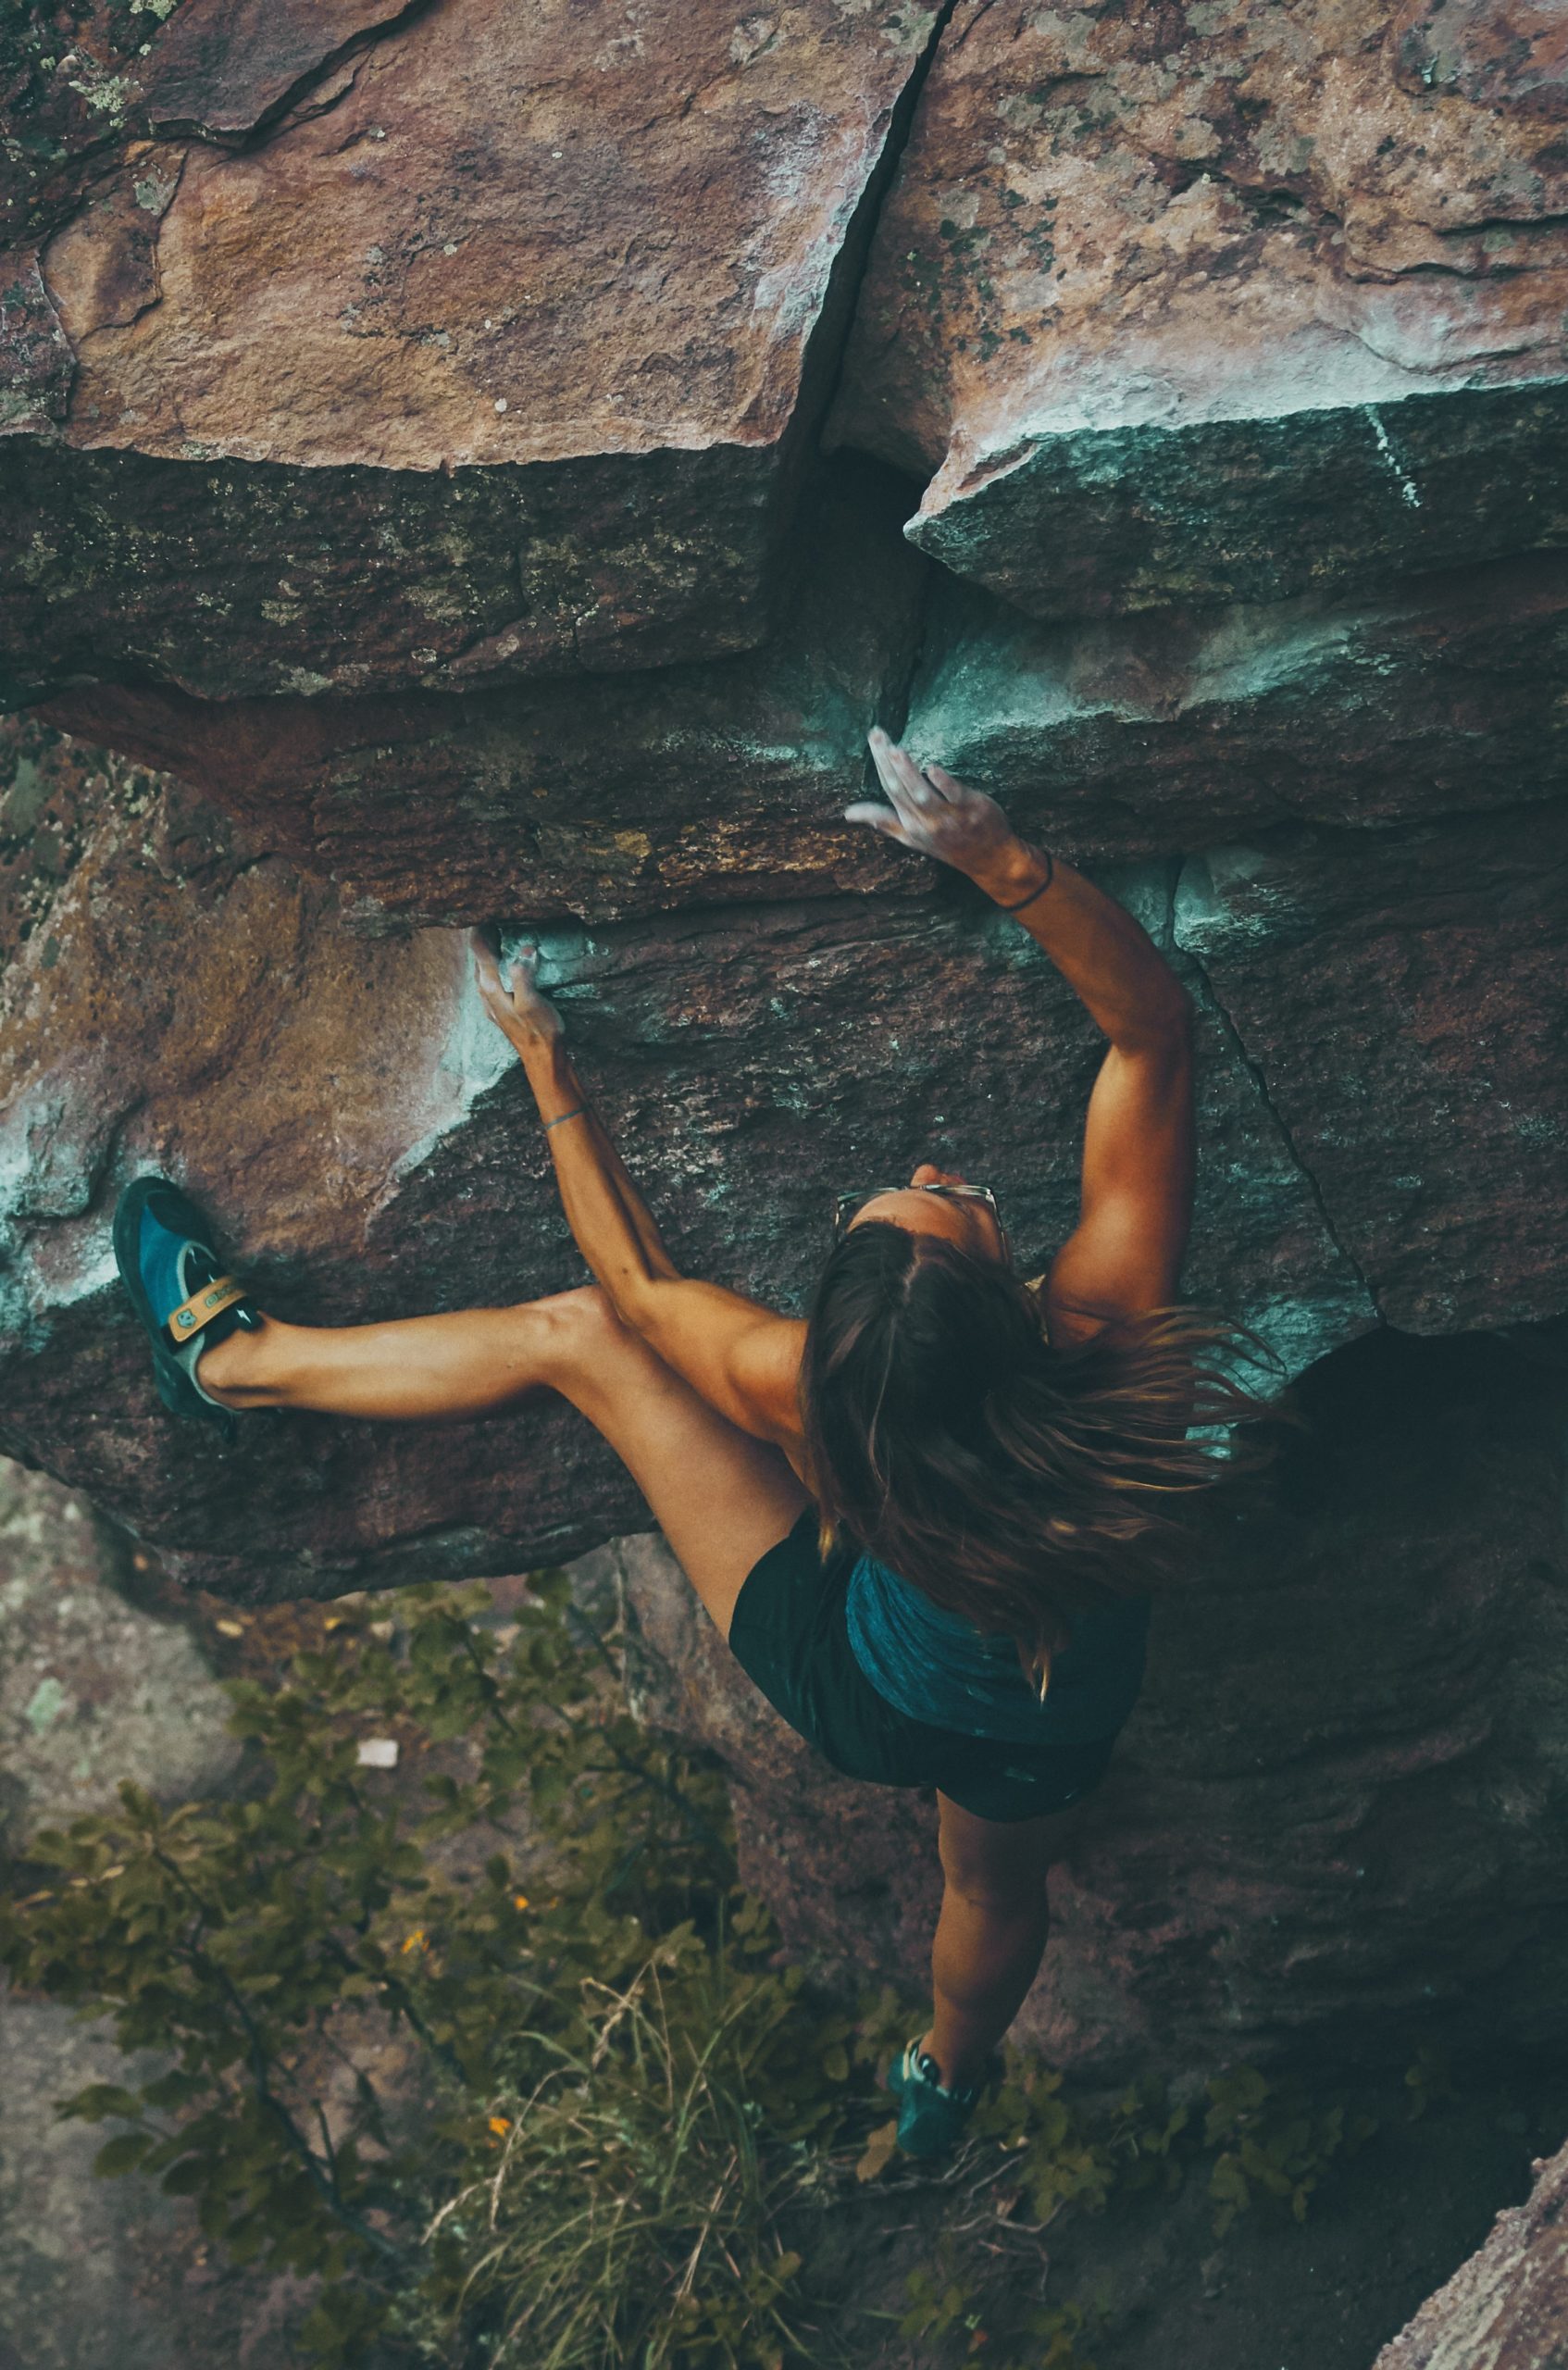 Blog woman rock climbing | Danit Sibs is a female stand-up comedian based out of New York City